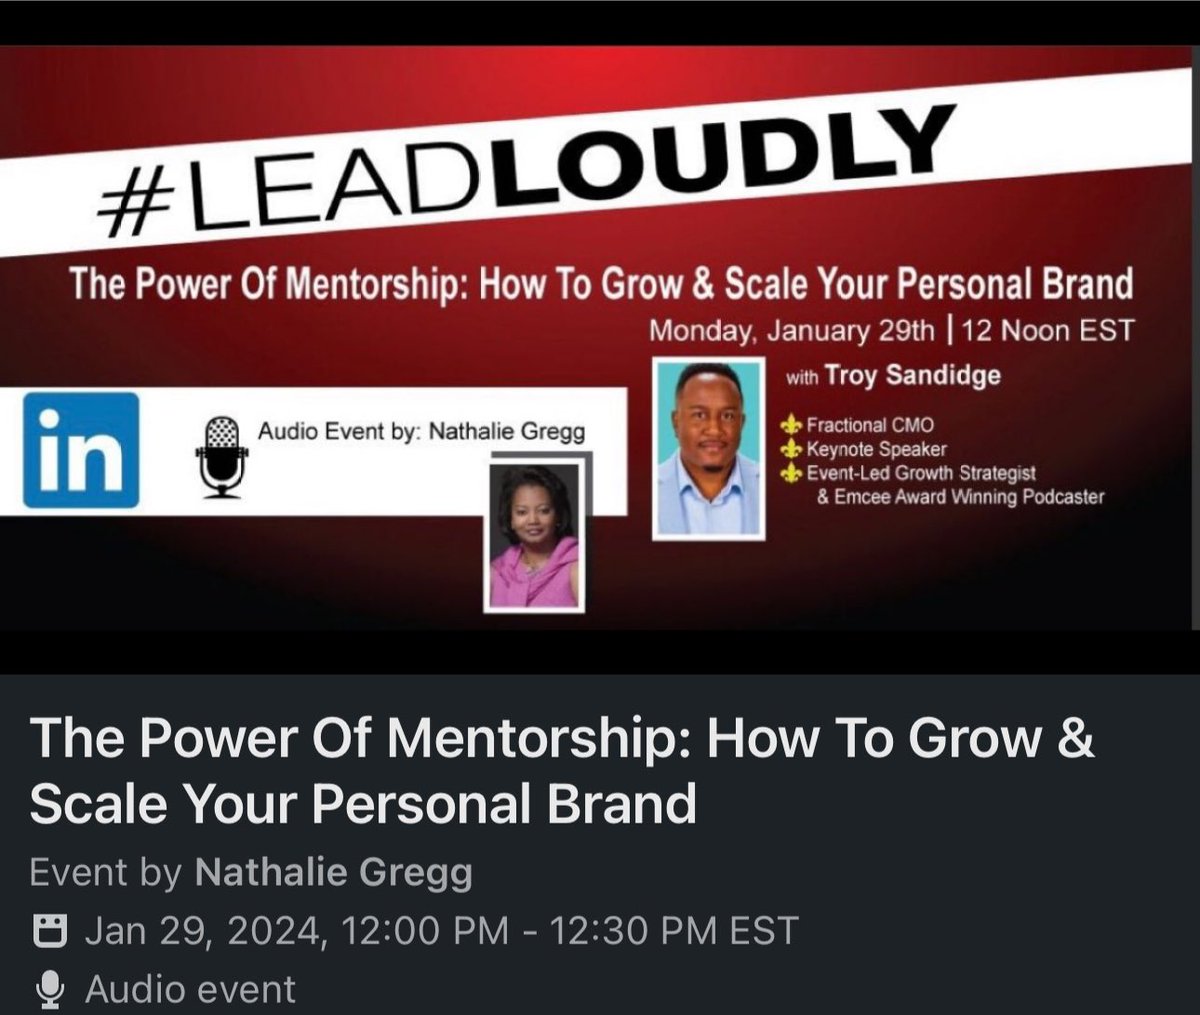 📣The Power Of Mentorship: How To Grow & Scale Your Personal Brand 📣

A LinkedIn LIVE Audio 🔴 with @NathalieGregg happening at the top of the hour!

🎙️ linkedin.com/events/thepowe…

#LeadLoudly